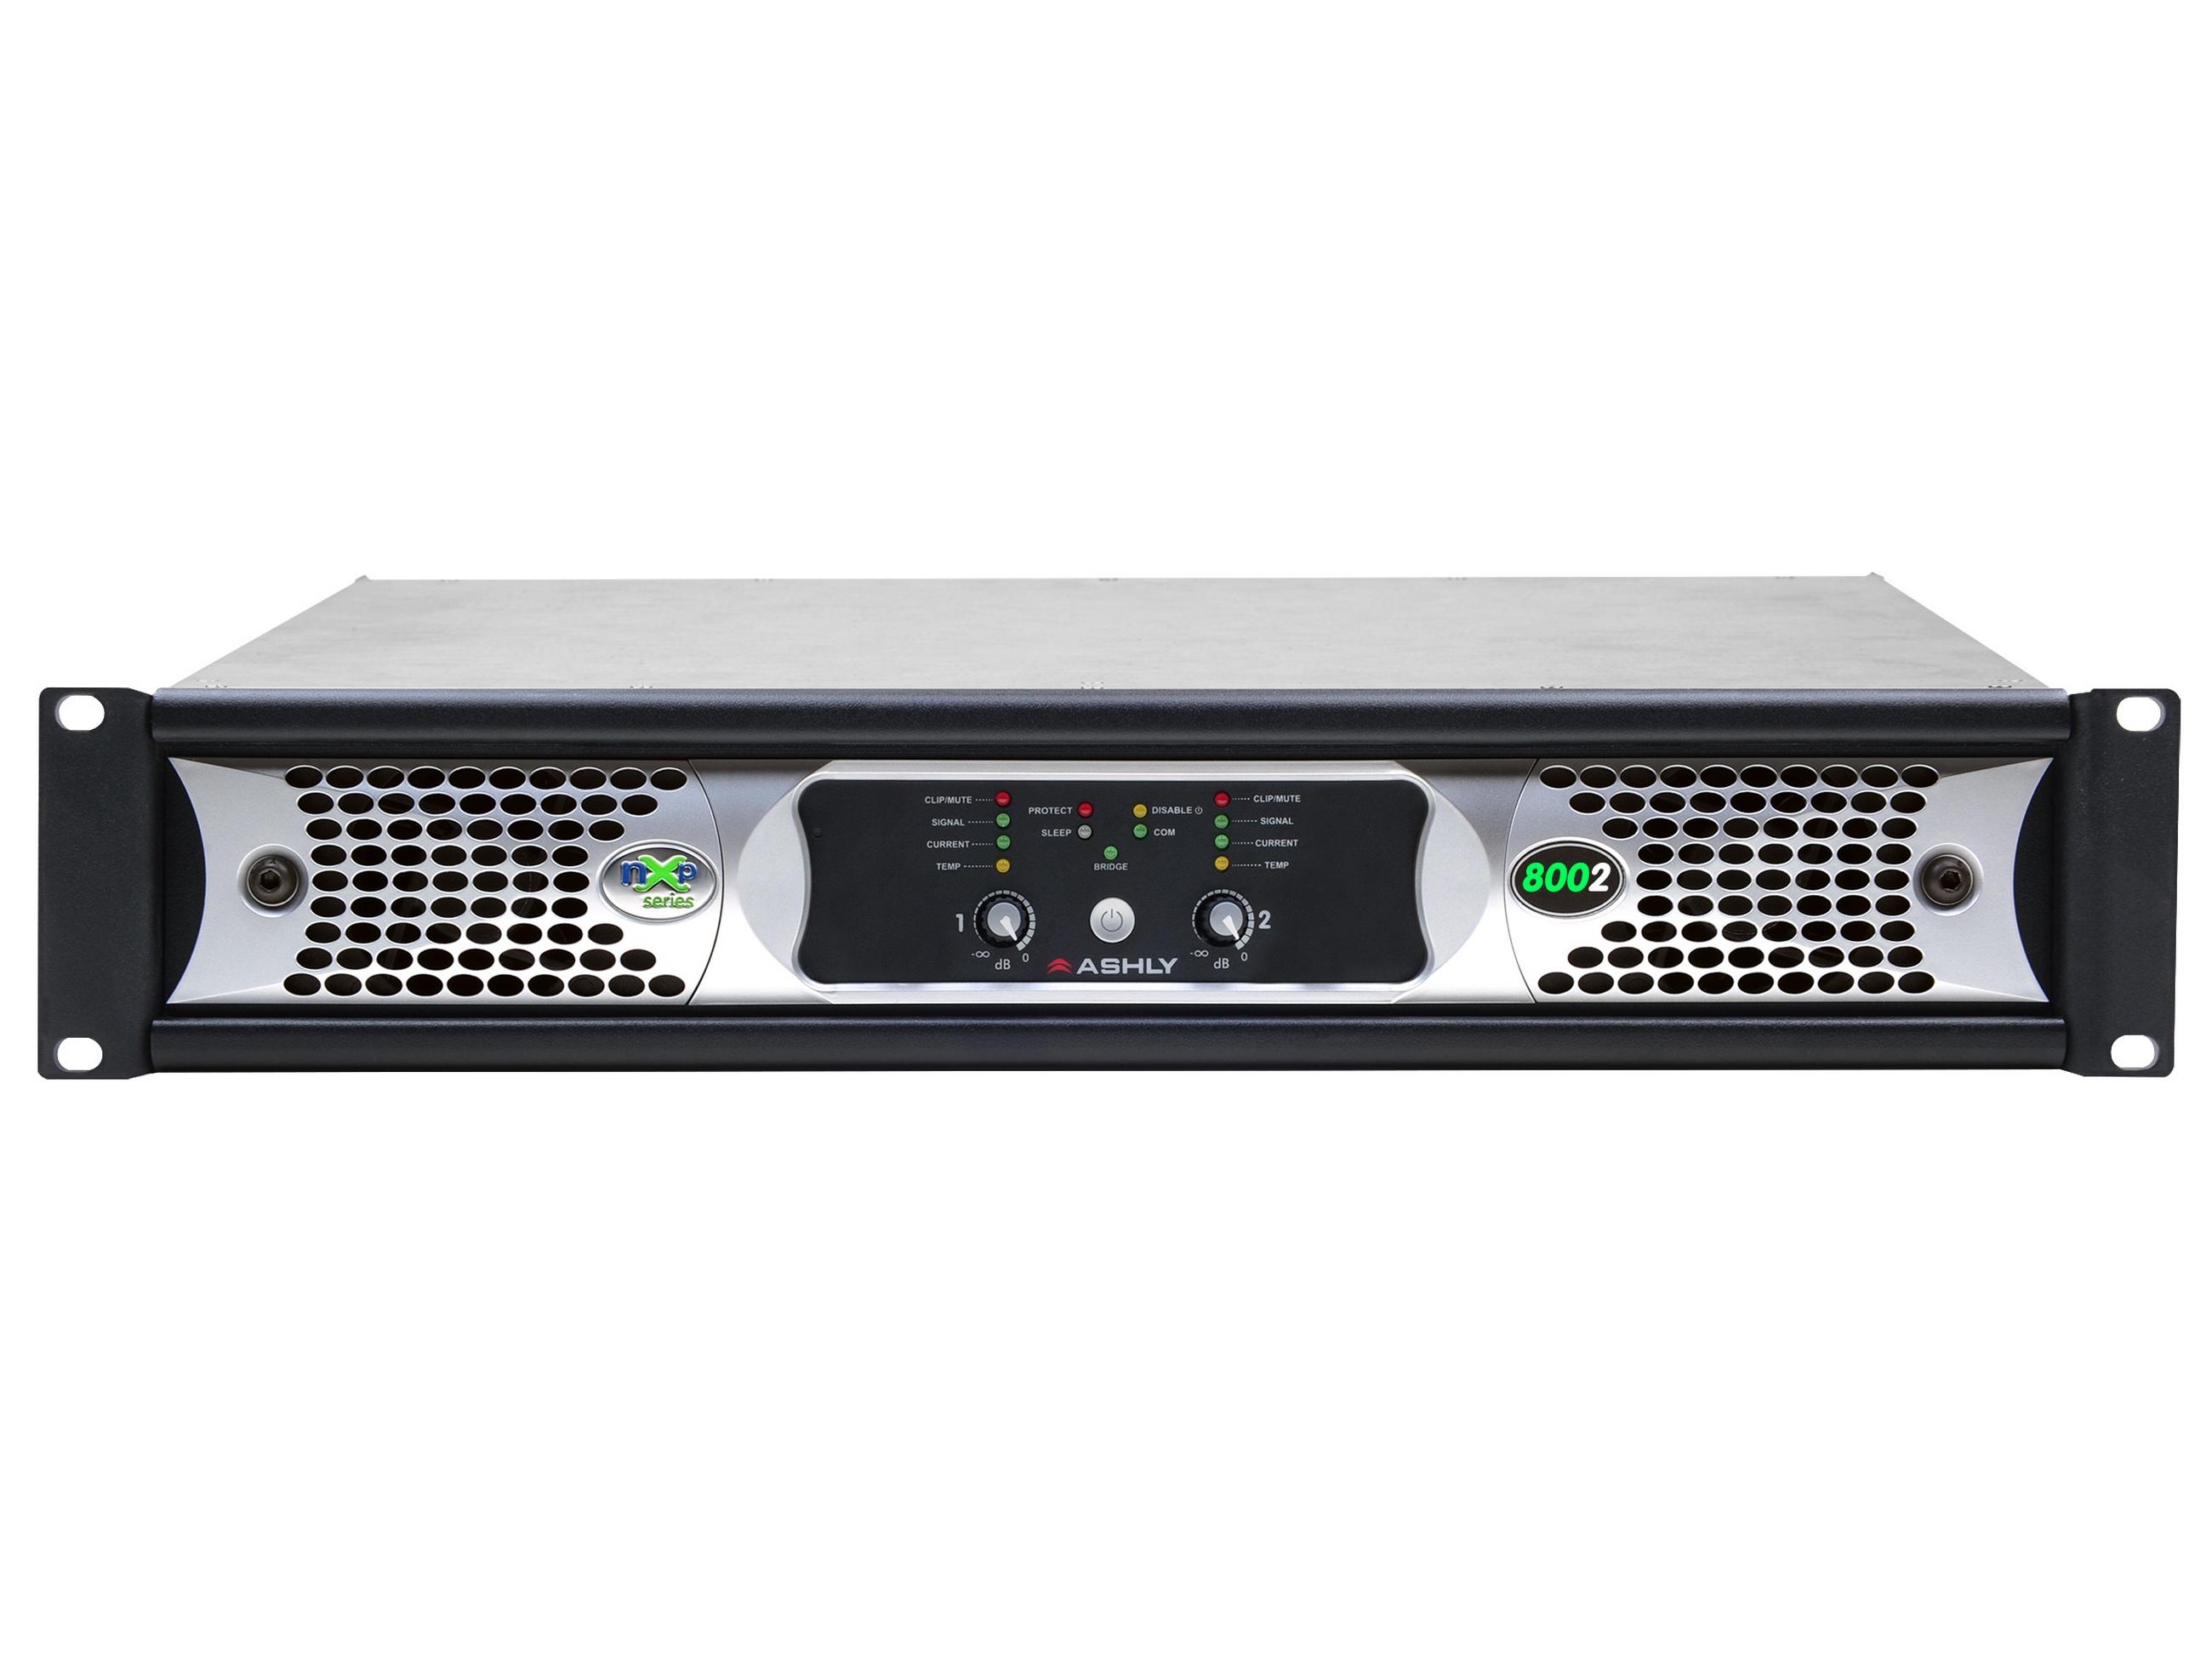 nXp8002d 2x 800 Watts/2 Ohms Network Power Amplifier with Protea DSP and OPDante Option Card by Ashly